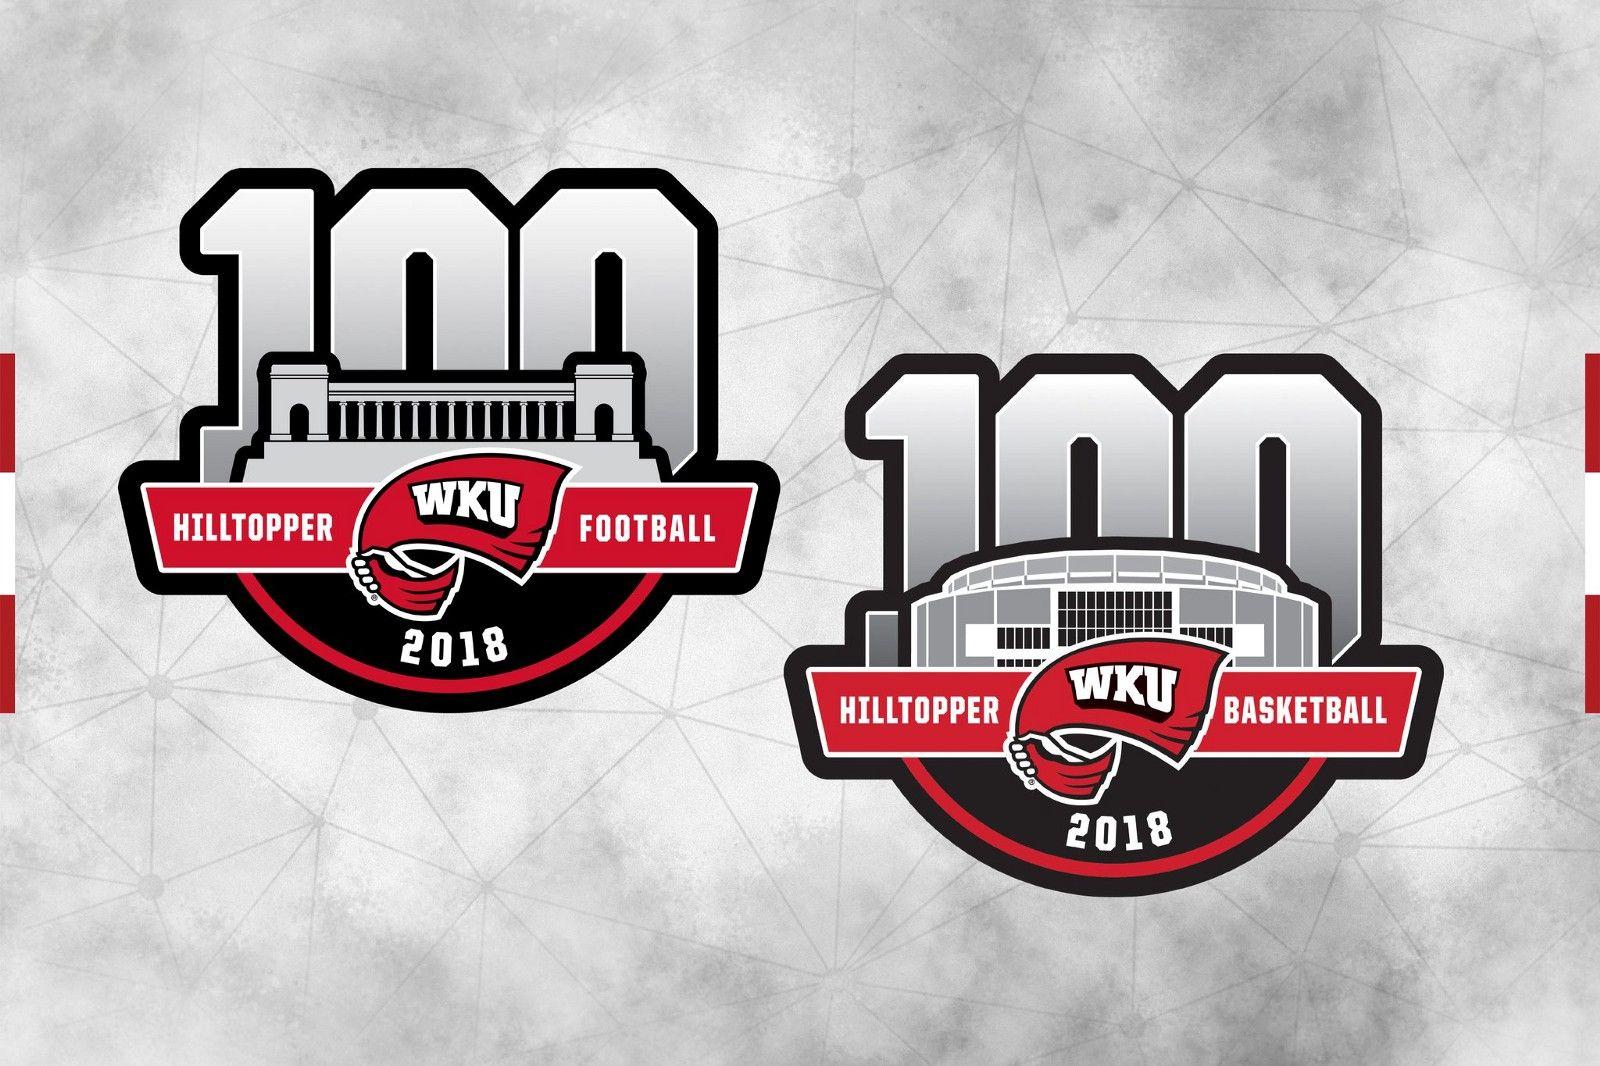 Hilltoppers Logo - WKU Hilltoppers: 100 Year Anniversary Logos Debuted For Football ...